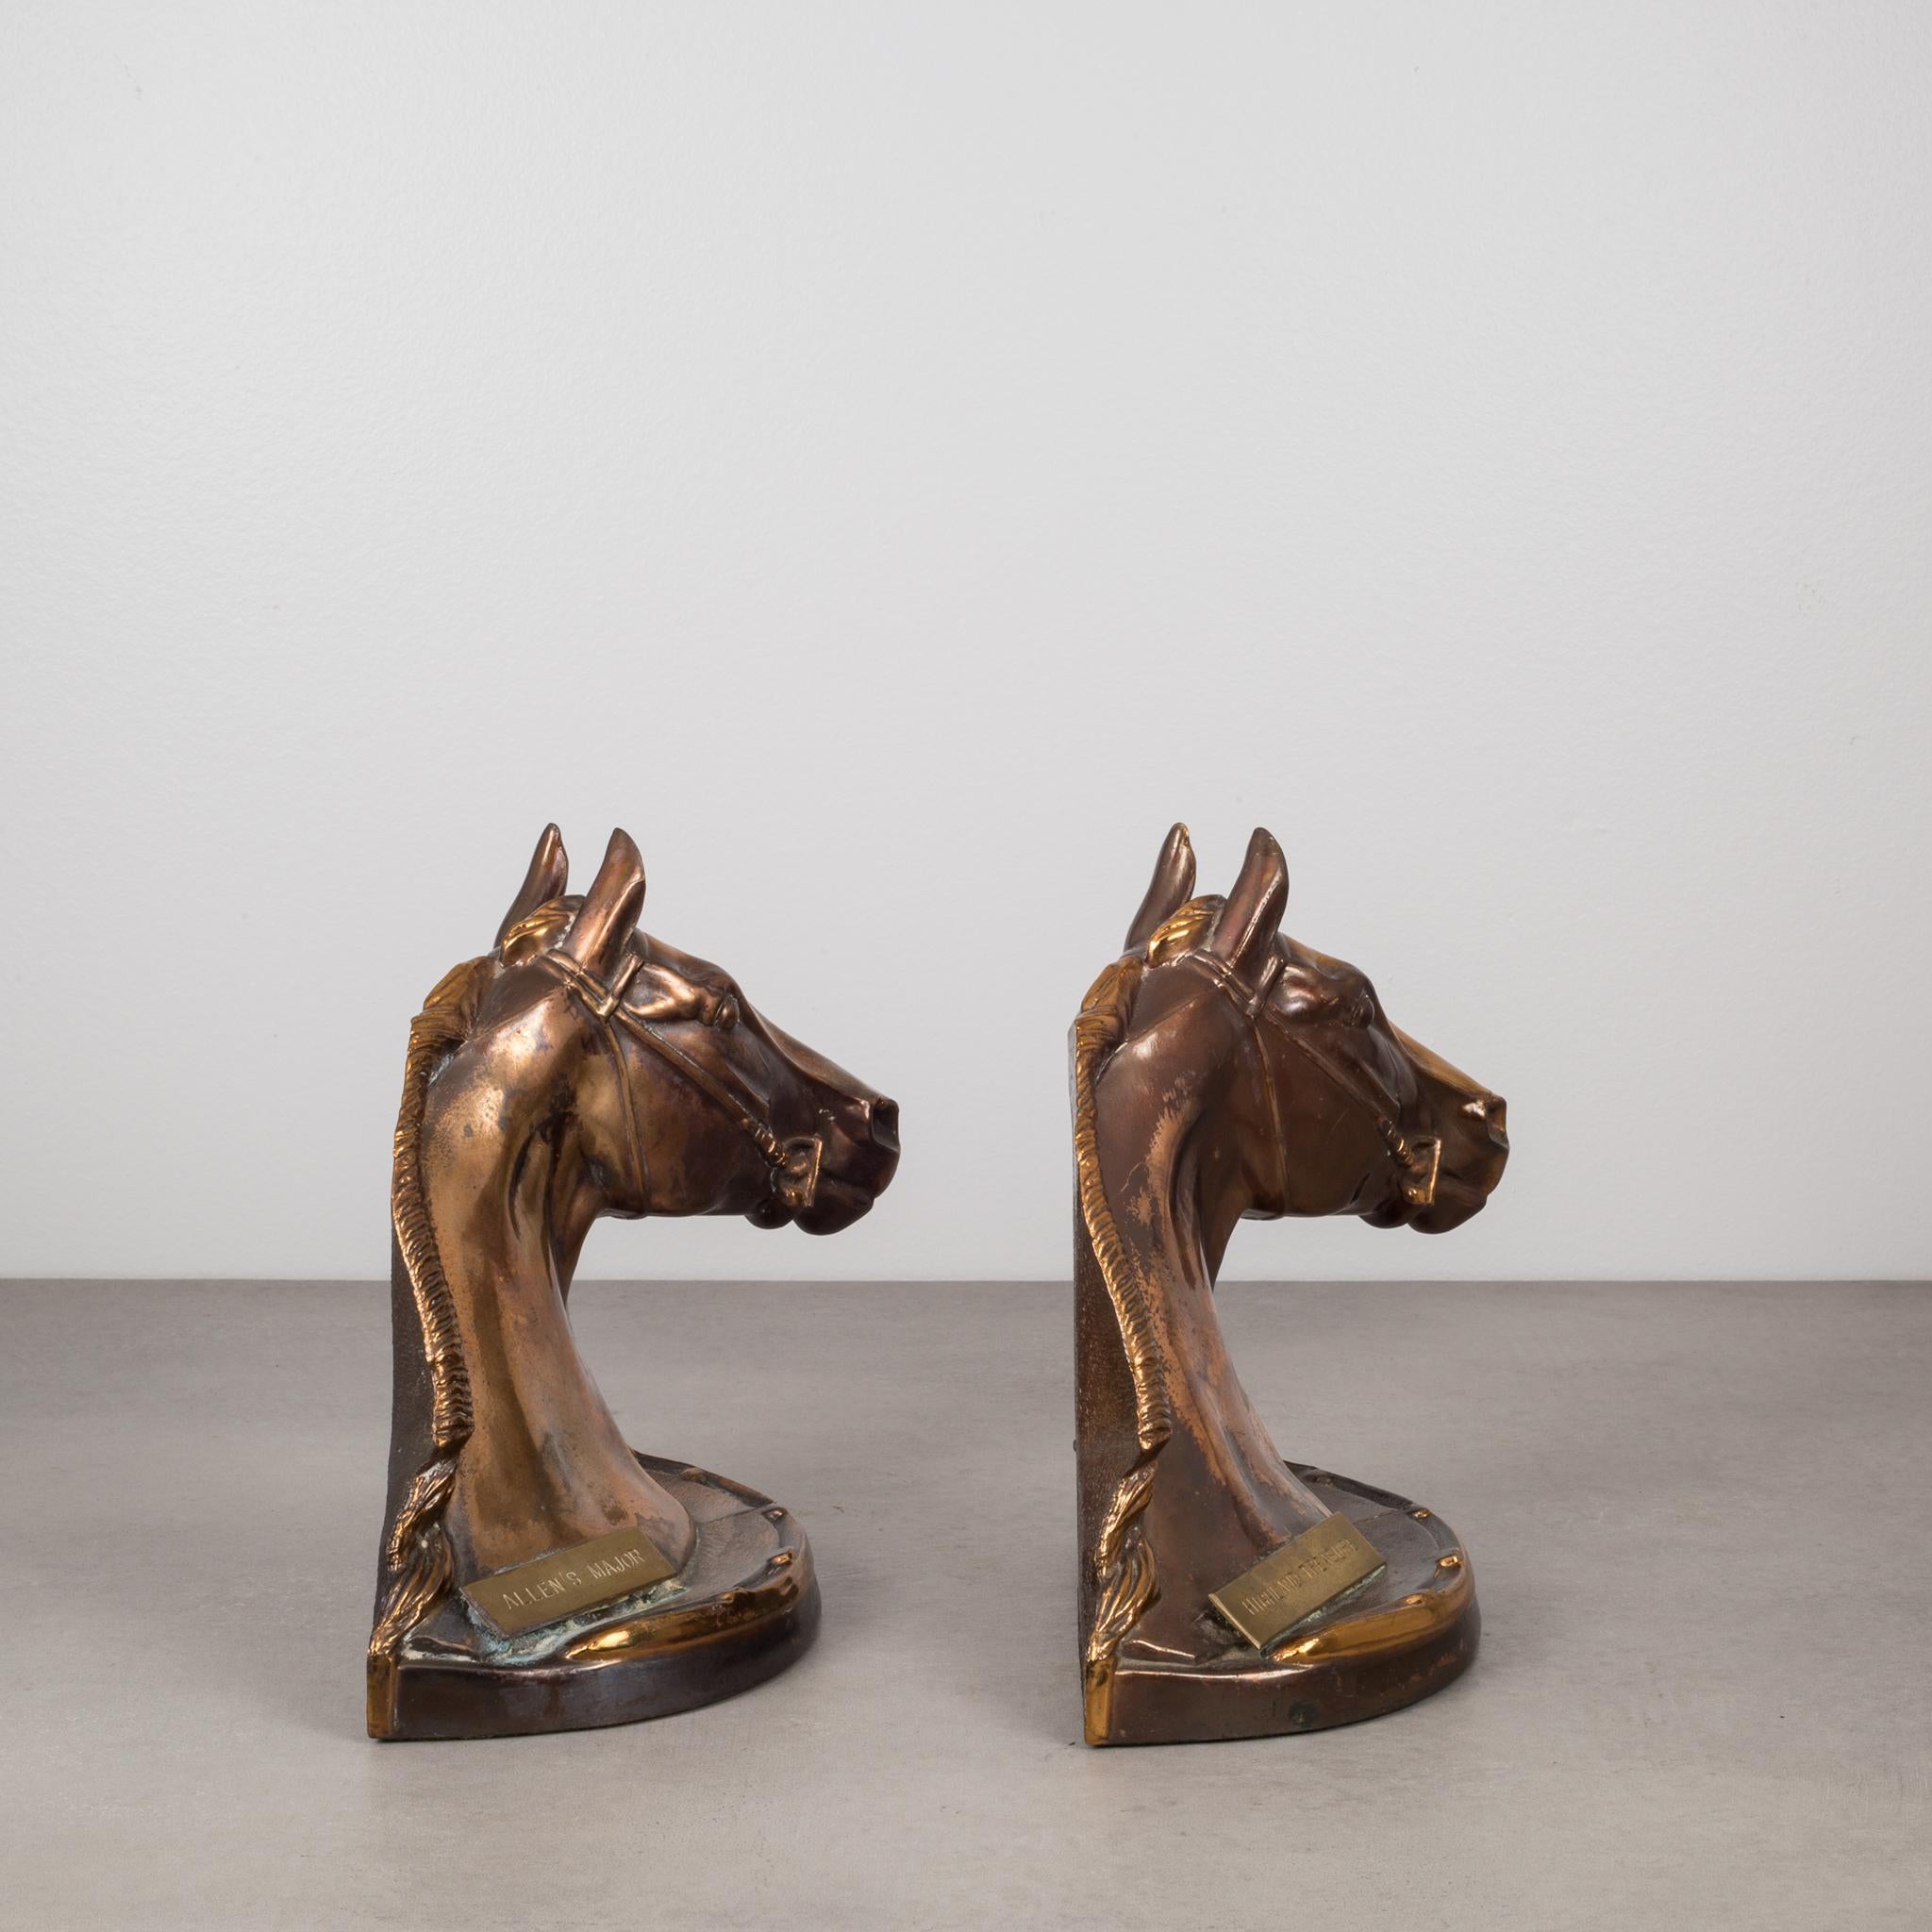 American 1940s Bronze-Plated Horse Bookends Signed by Gladys Brown